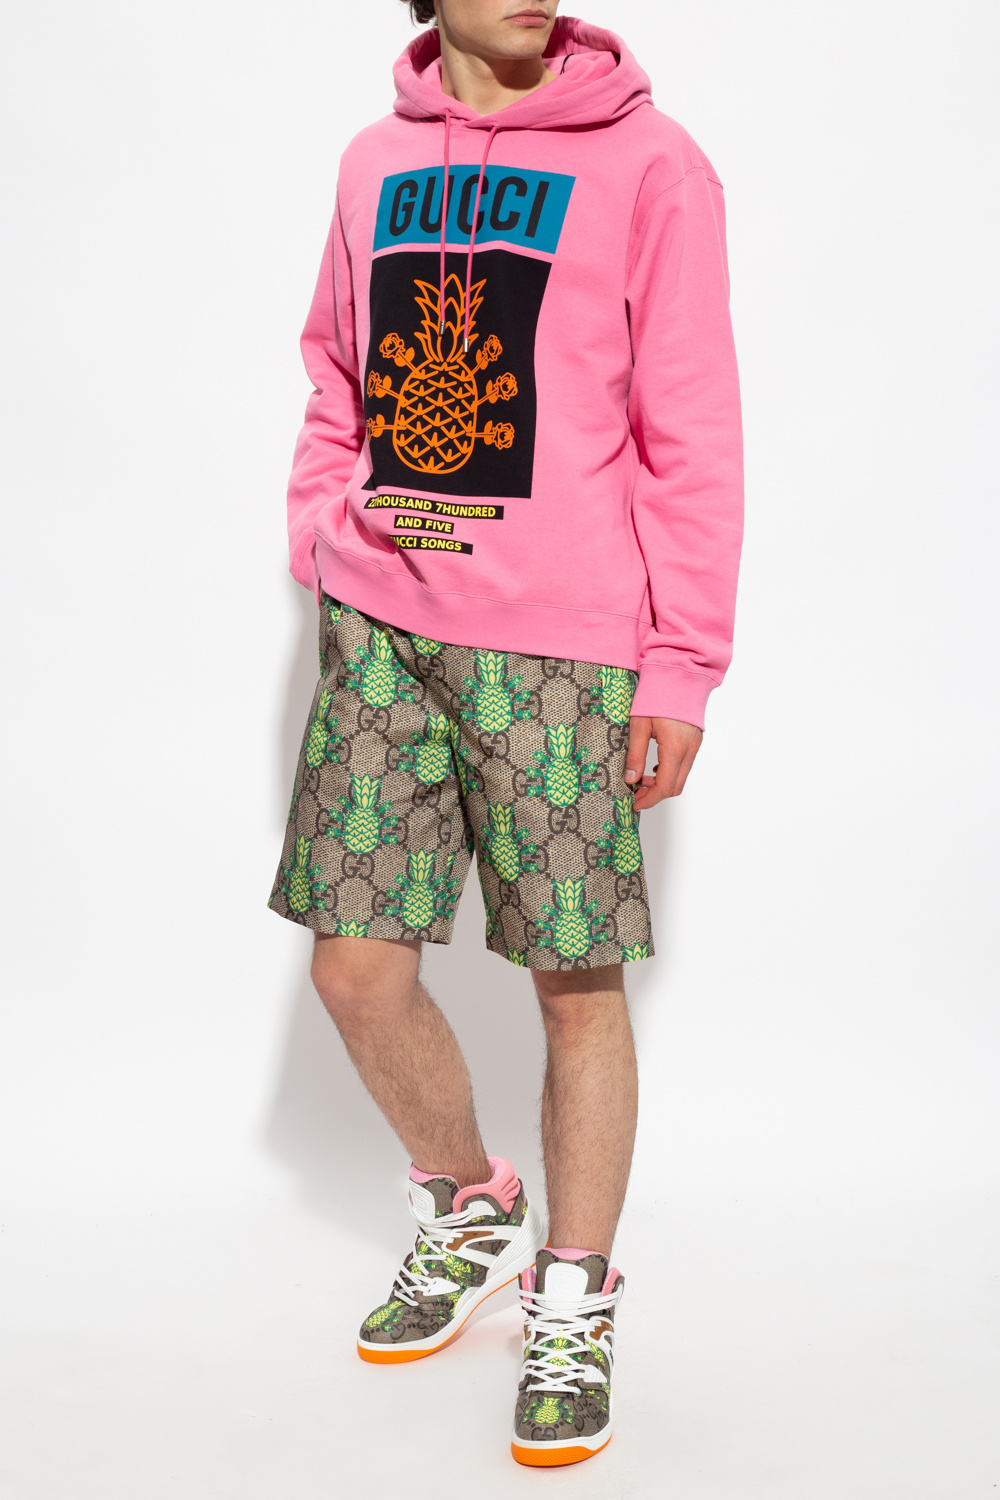 gucci LOGO The ‘gucci LOGO Pineapple’ collection hoodie